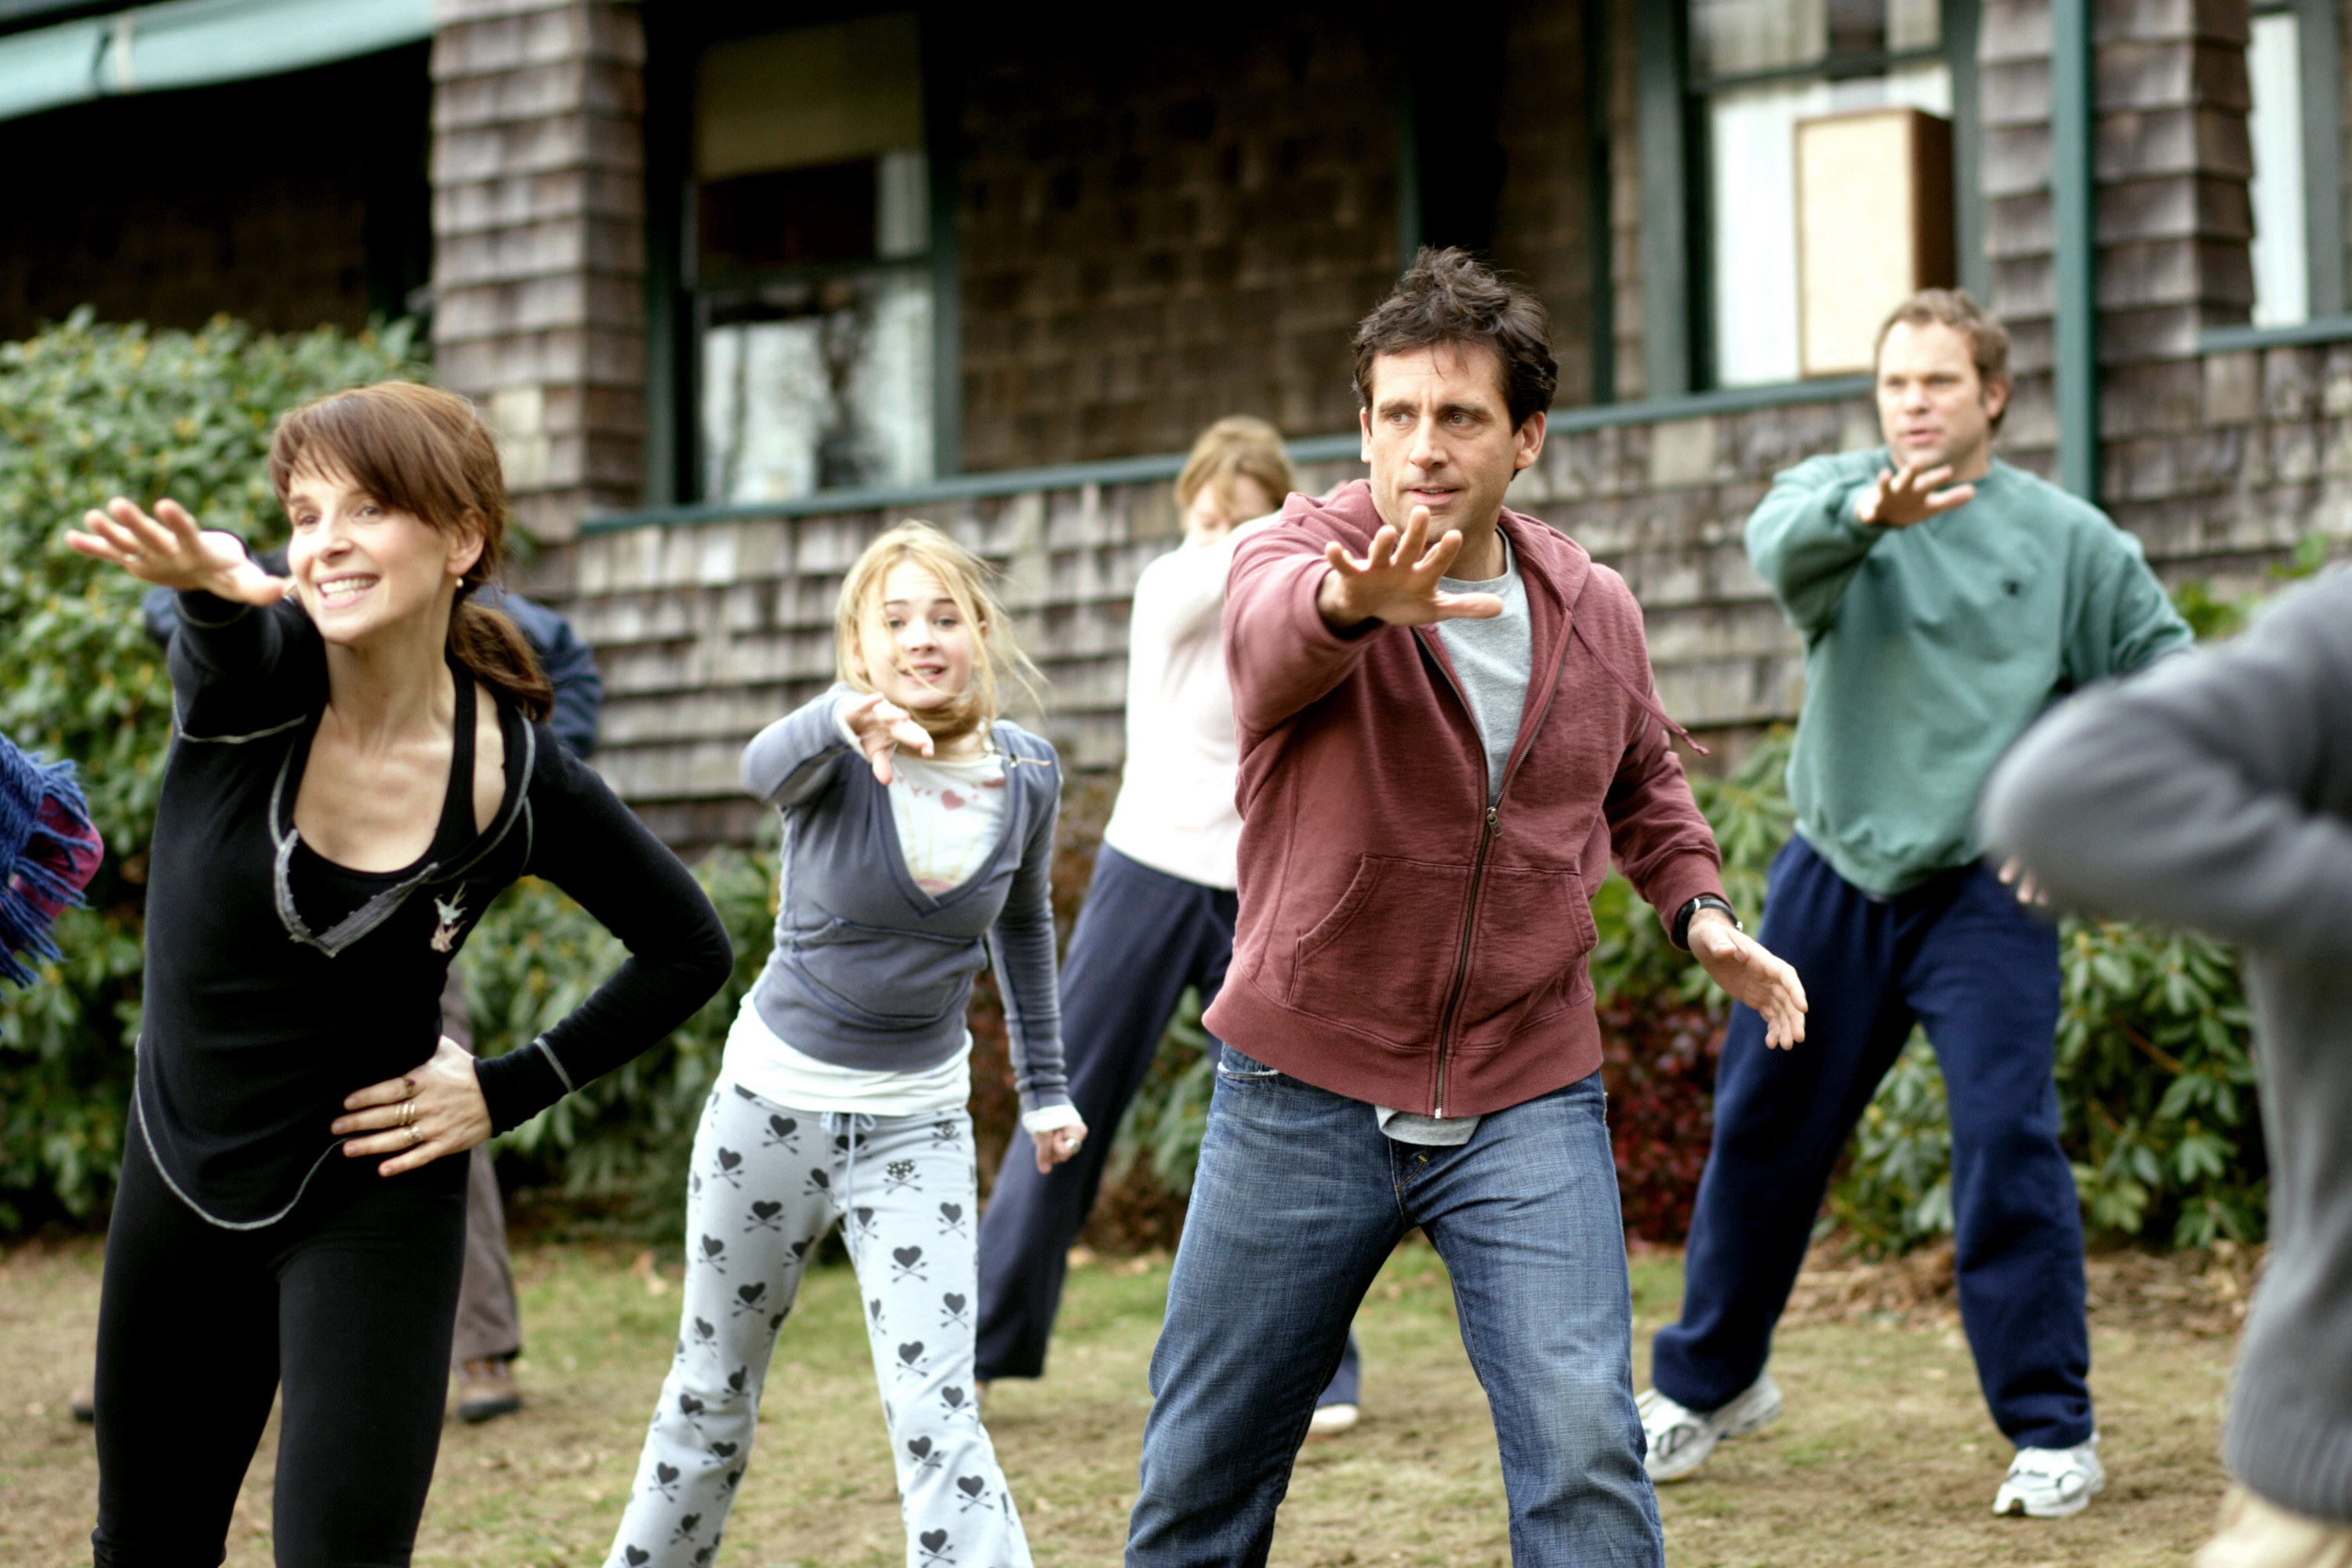 Juliette Binoche Alison Pill, and Steve Carell dance in the lawn with the family